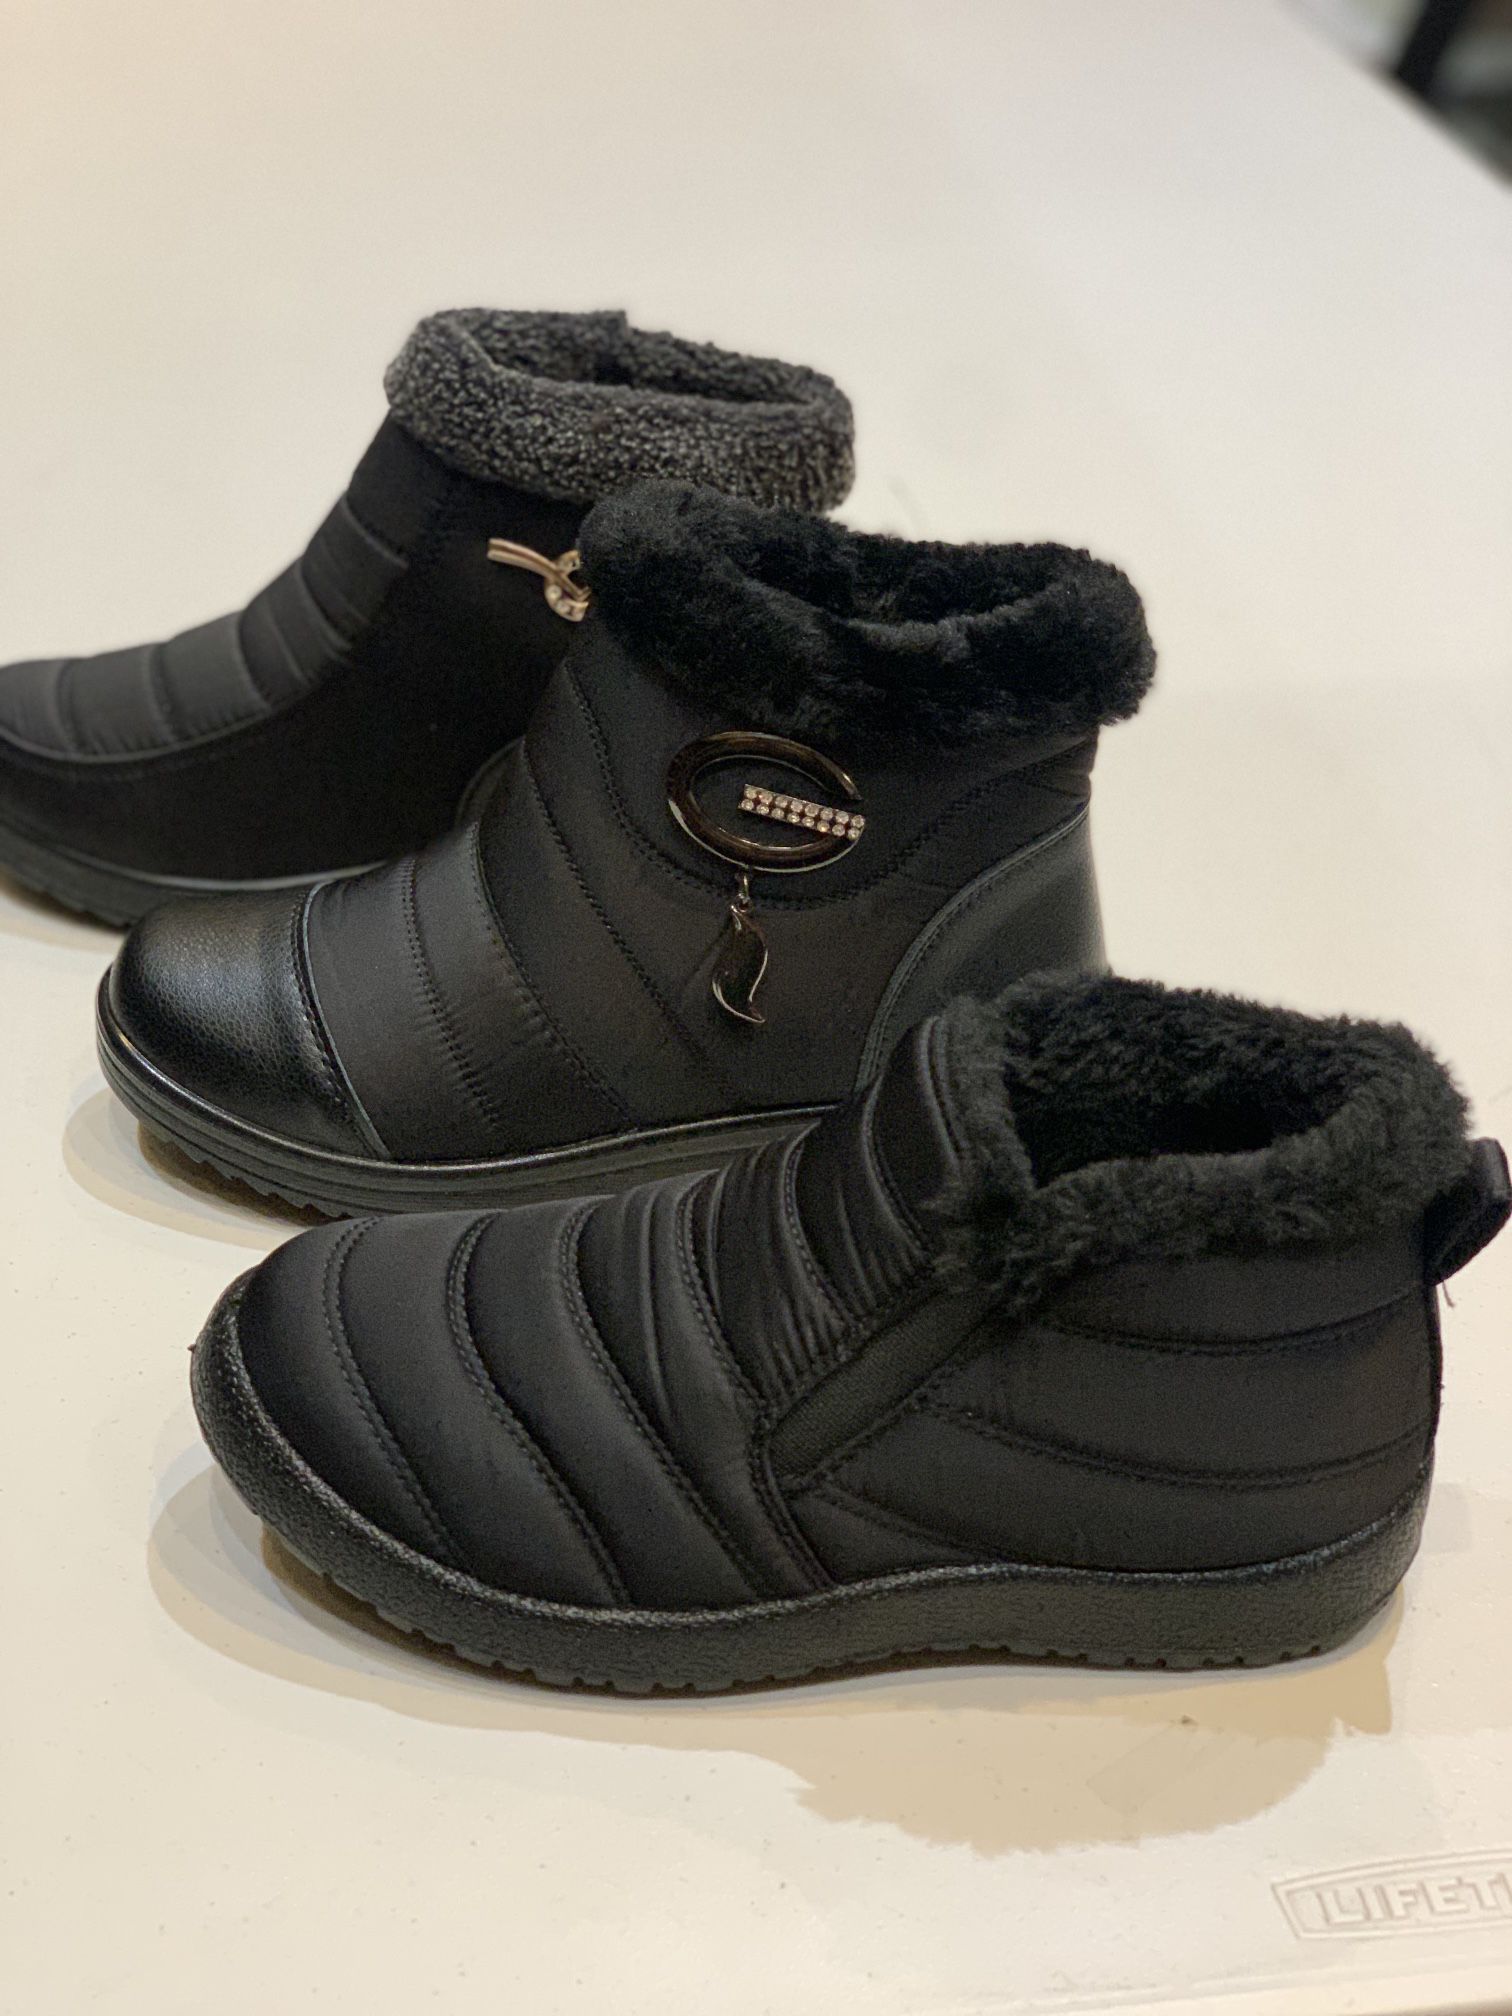 Snow Boots For Women Warm Cozy Sizes Available 